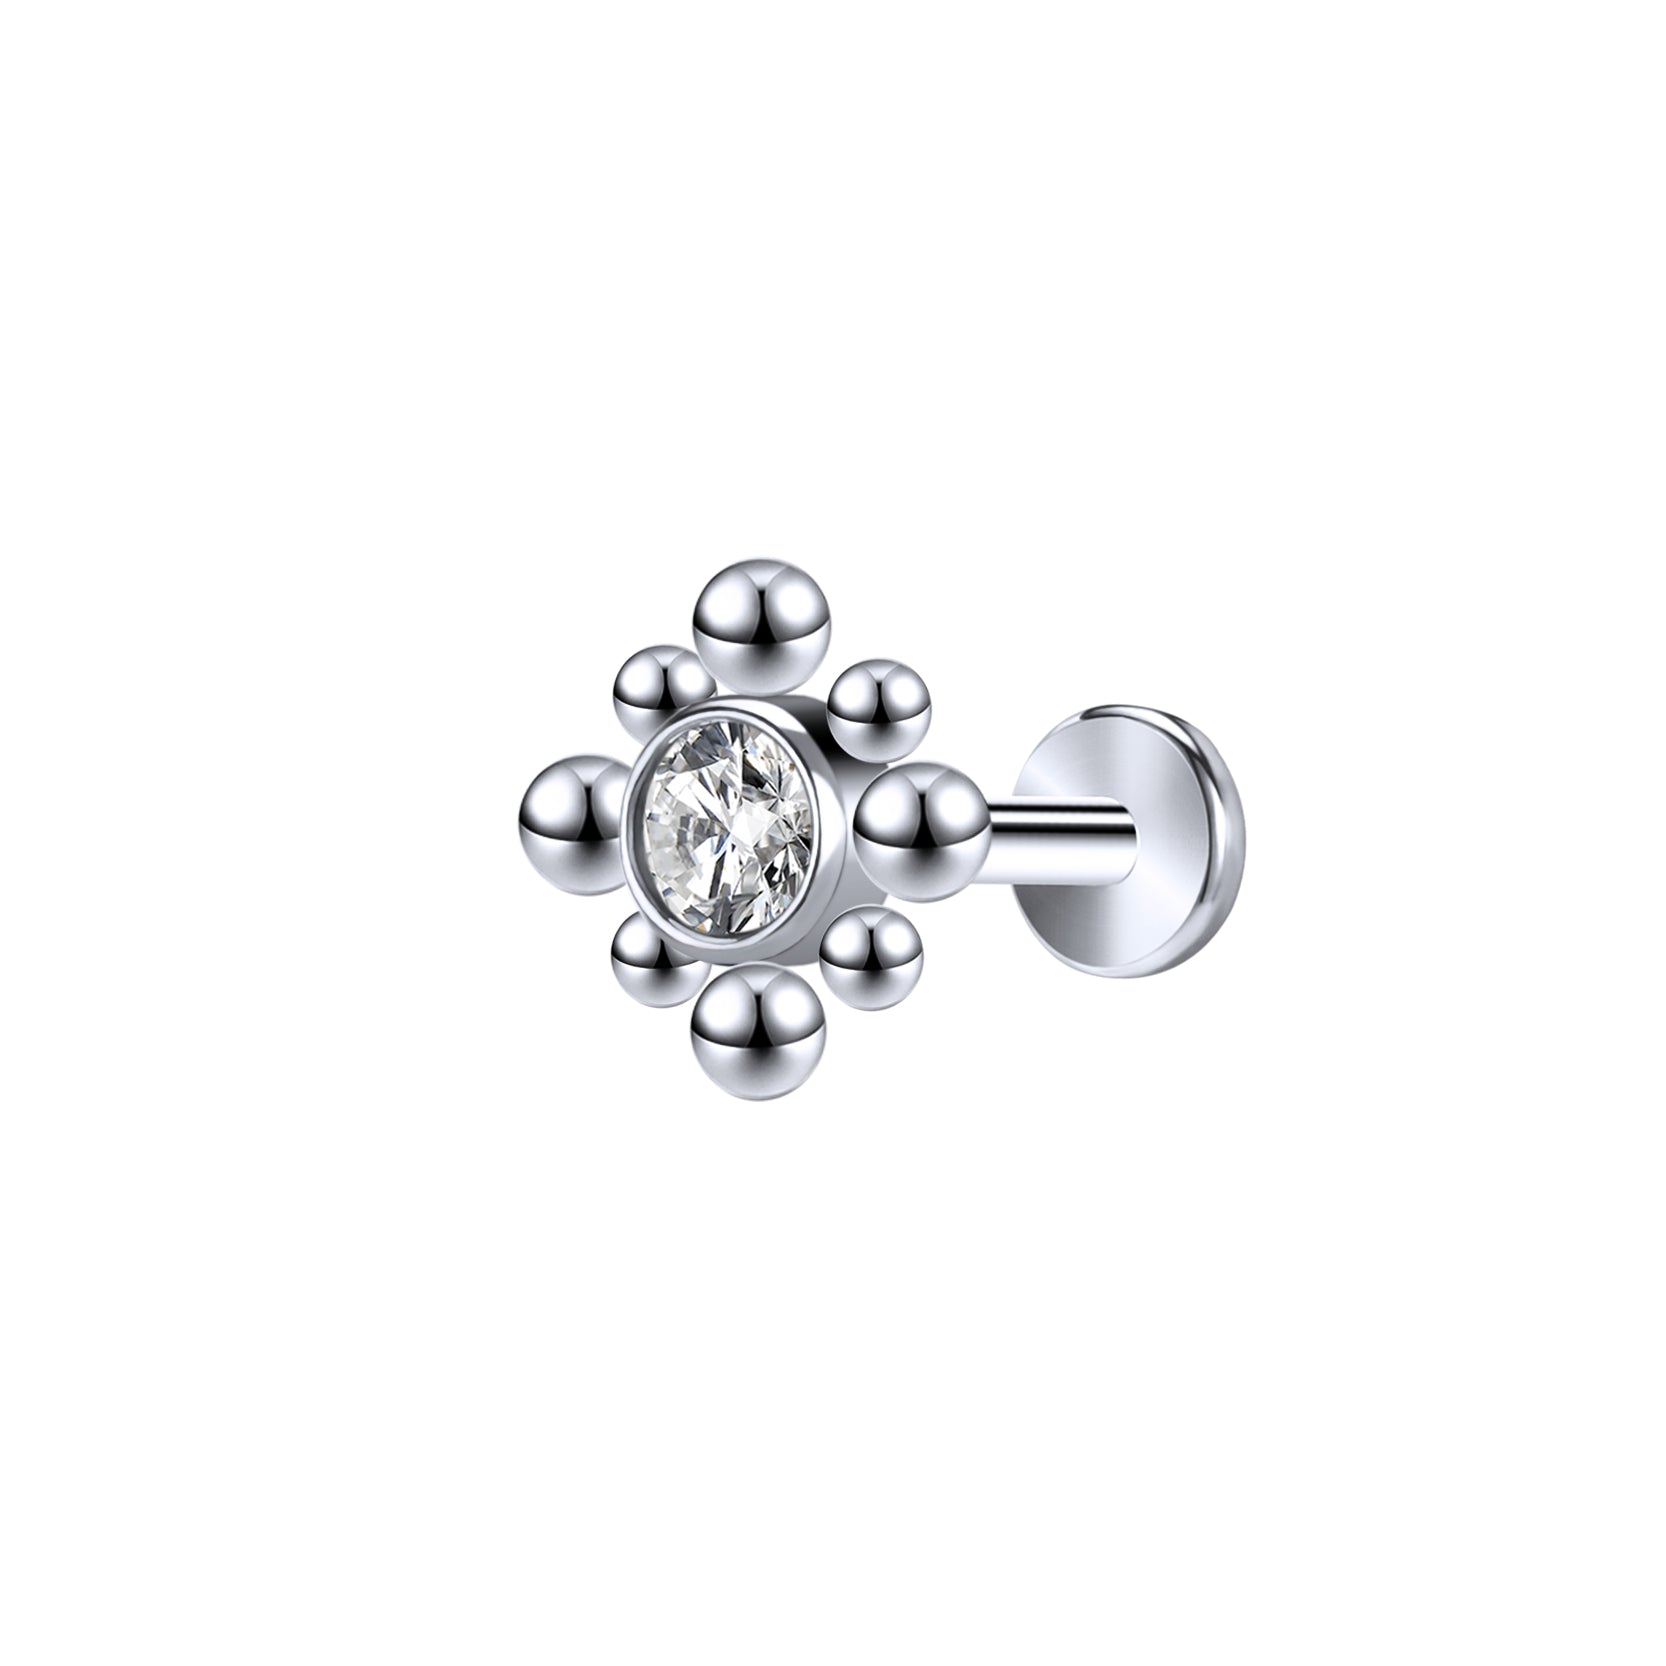 16g-ball-crystal-labret-rings-tragus-helix-conch-lip-piercing